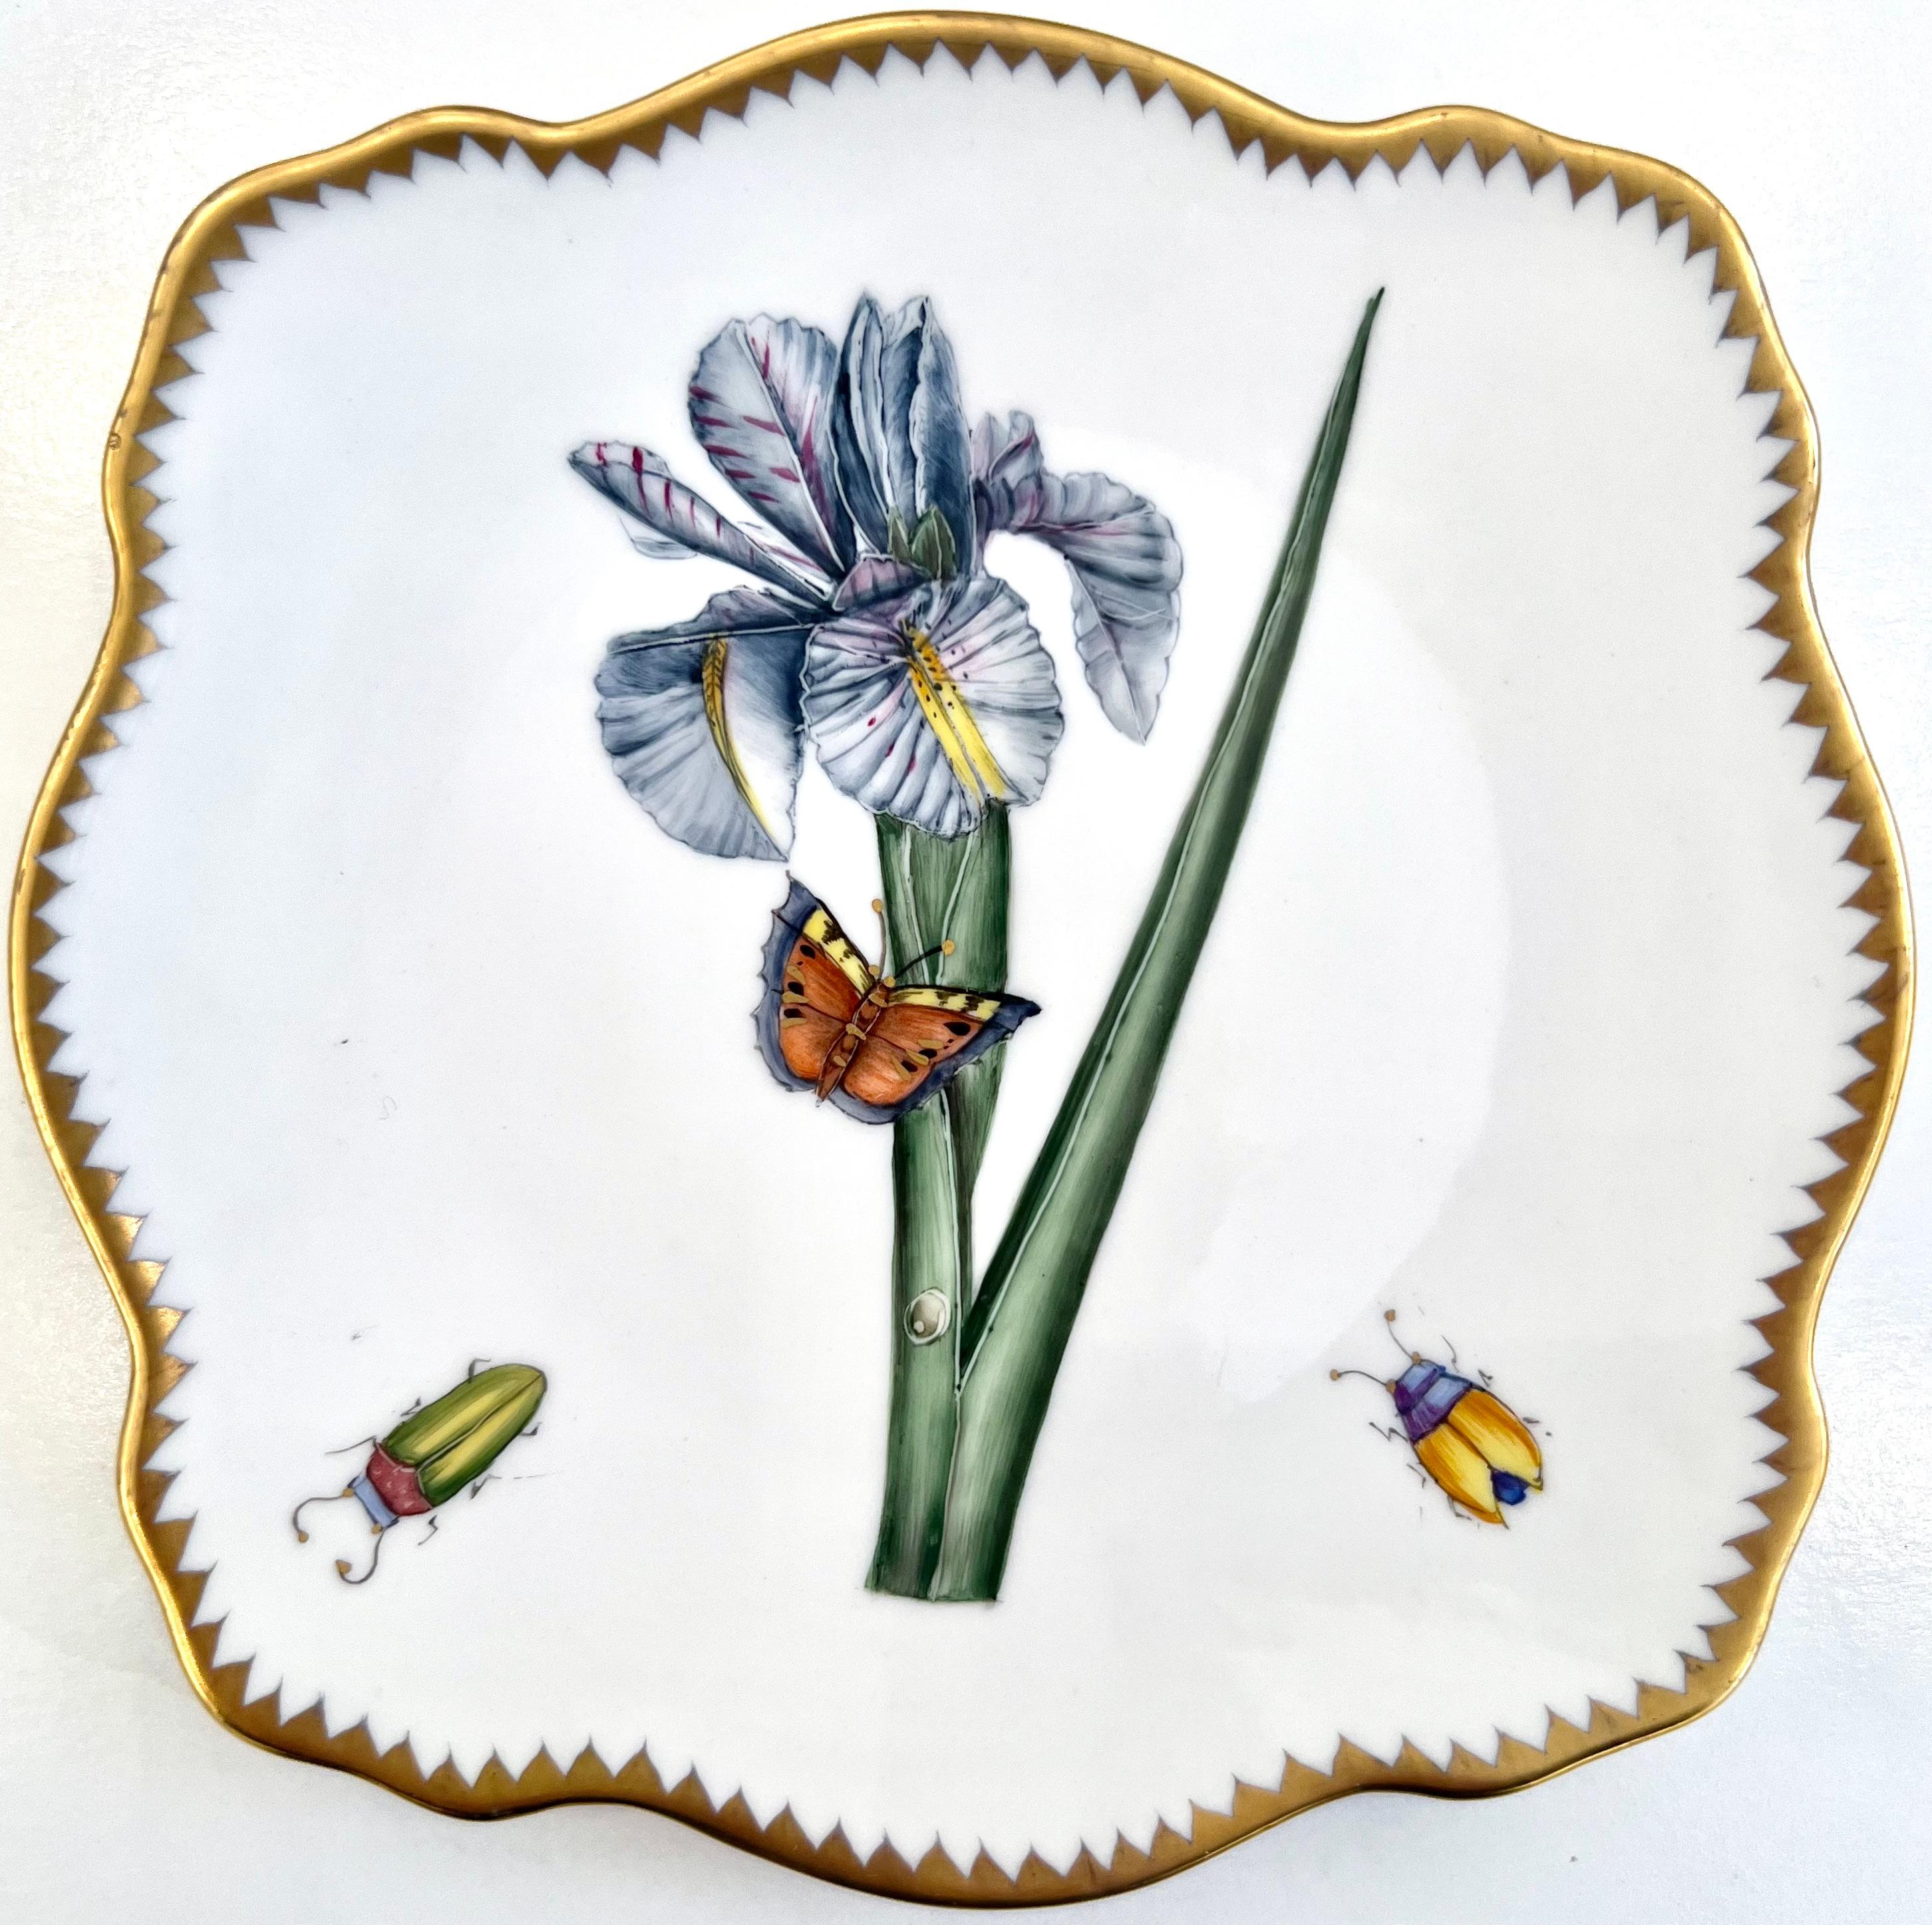 Contemporary Anna Weatherley - Hand Painted Porcelain Plates